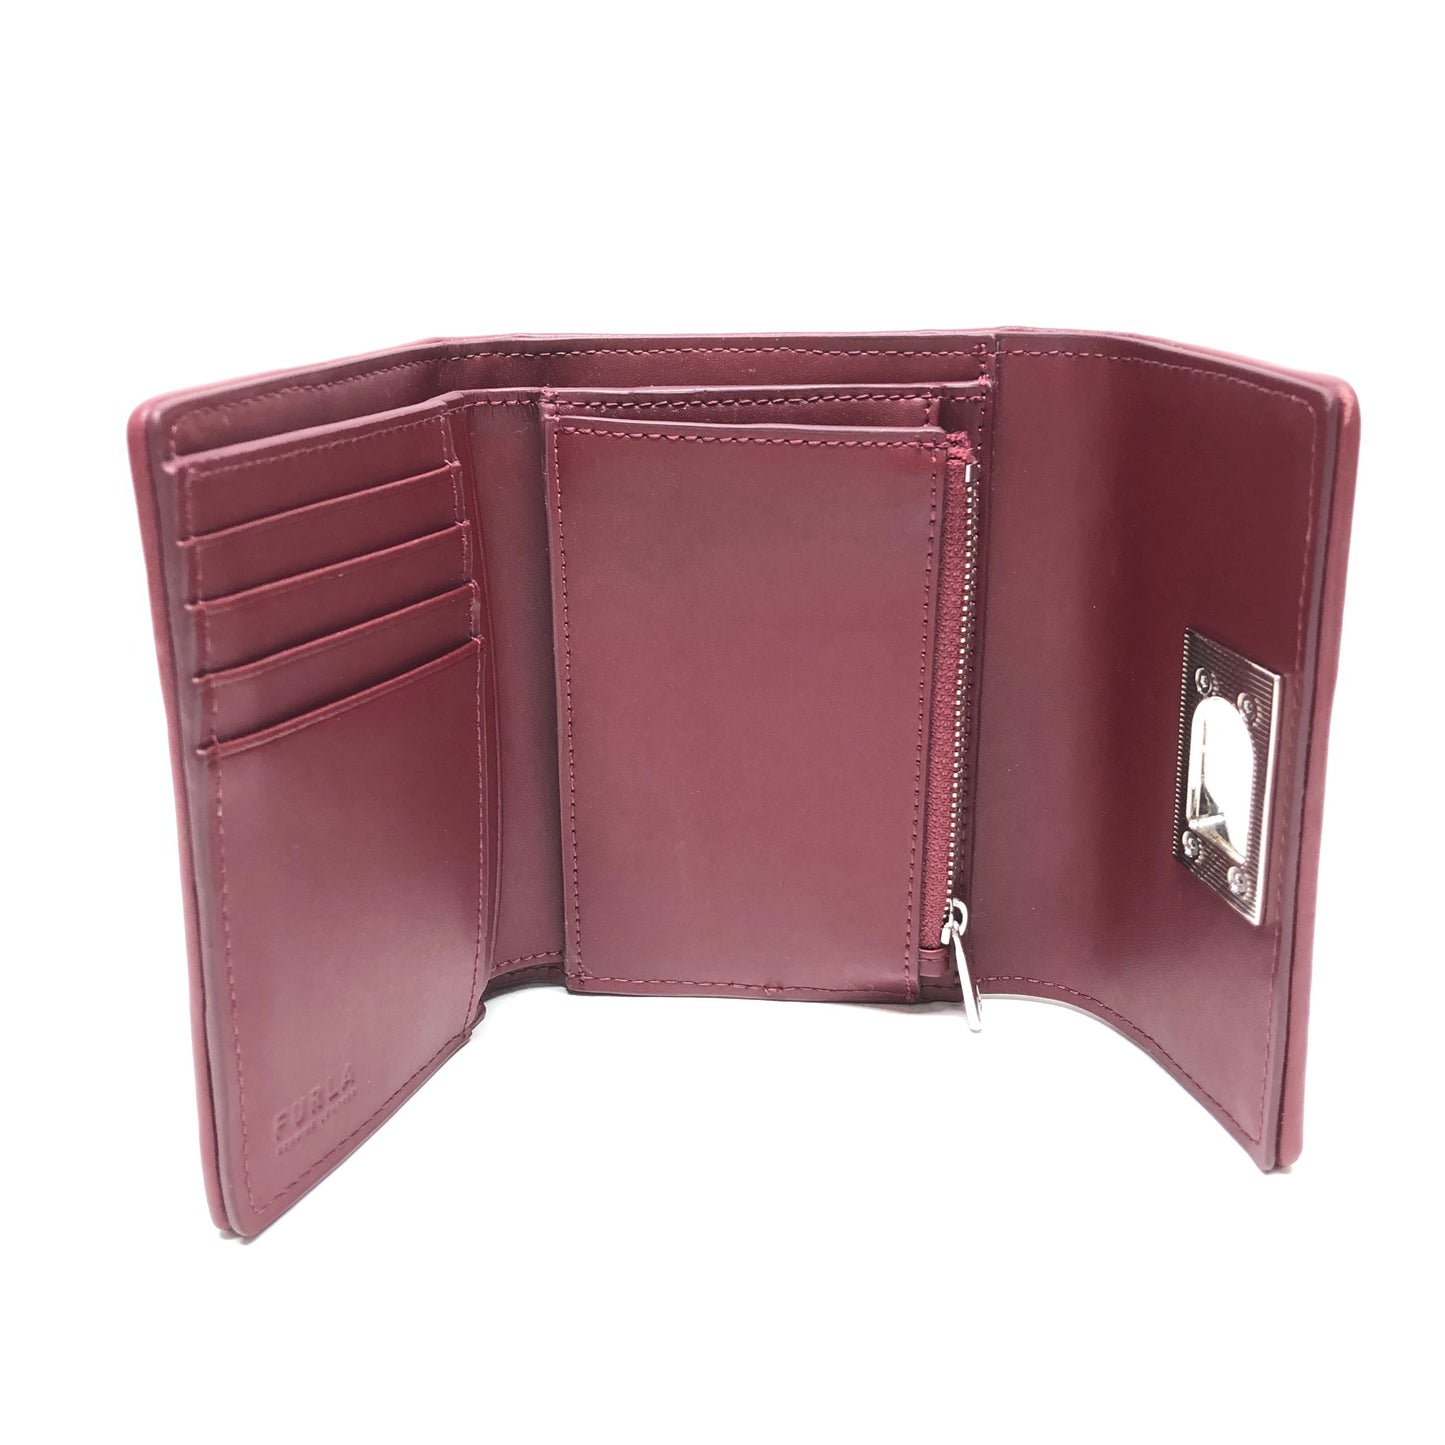 Wallet Designer By Furla  Size: Small